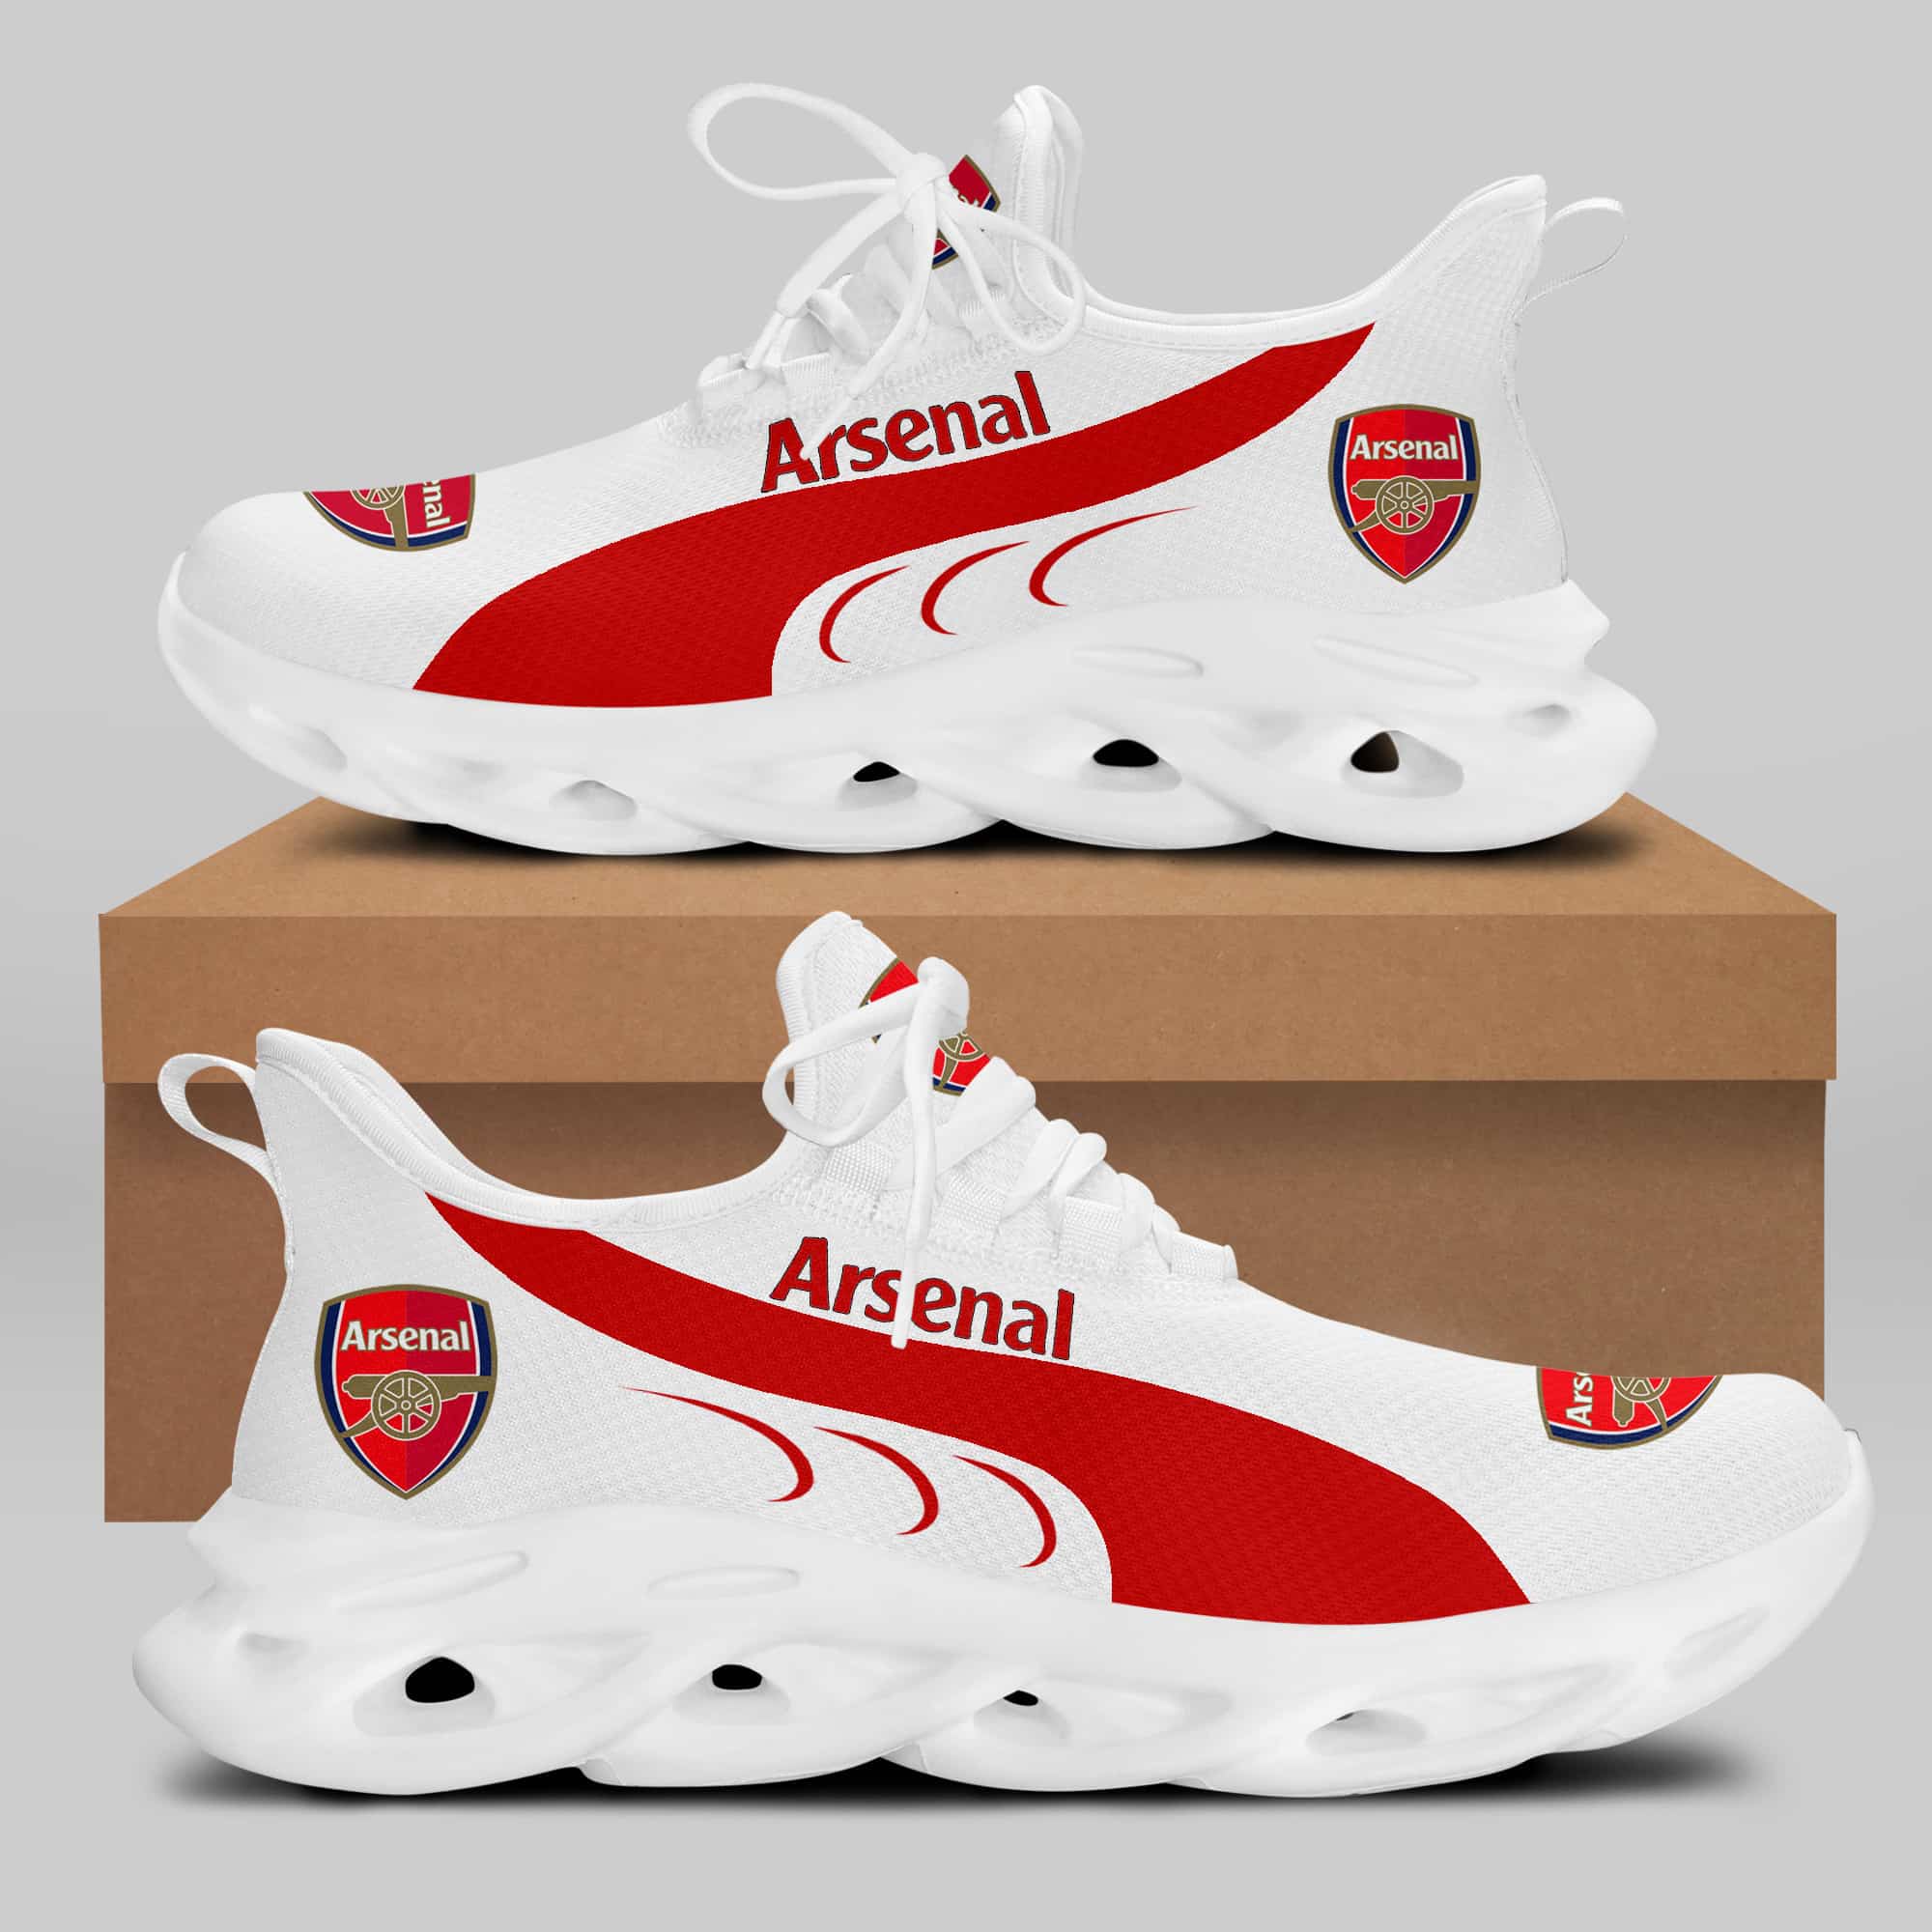 Arsenal Running Shoes Max Soul Shoes Sneakers Ver 2 1